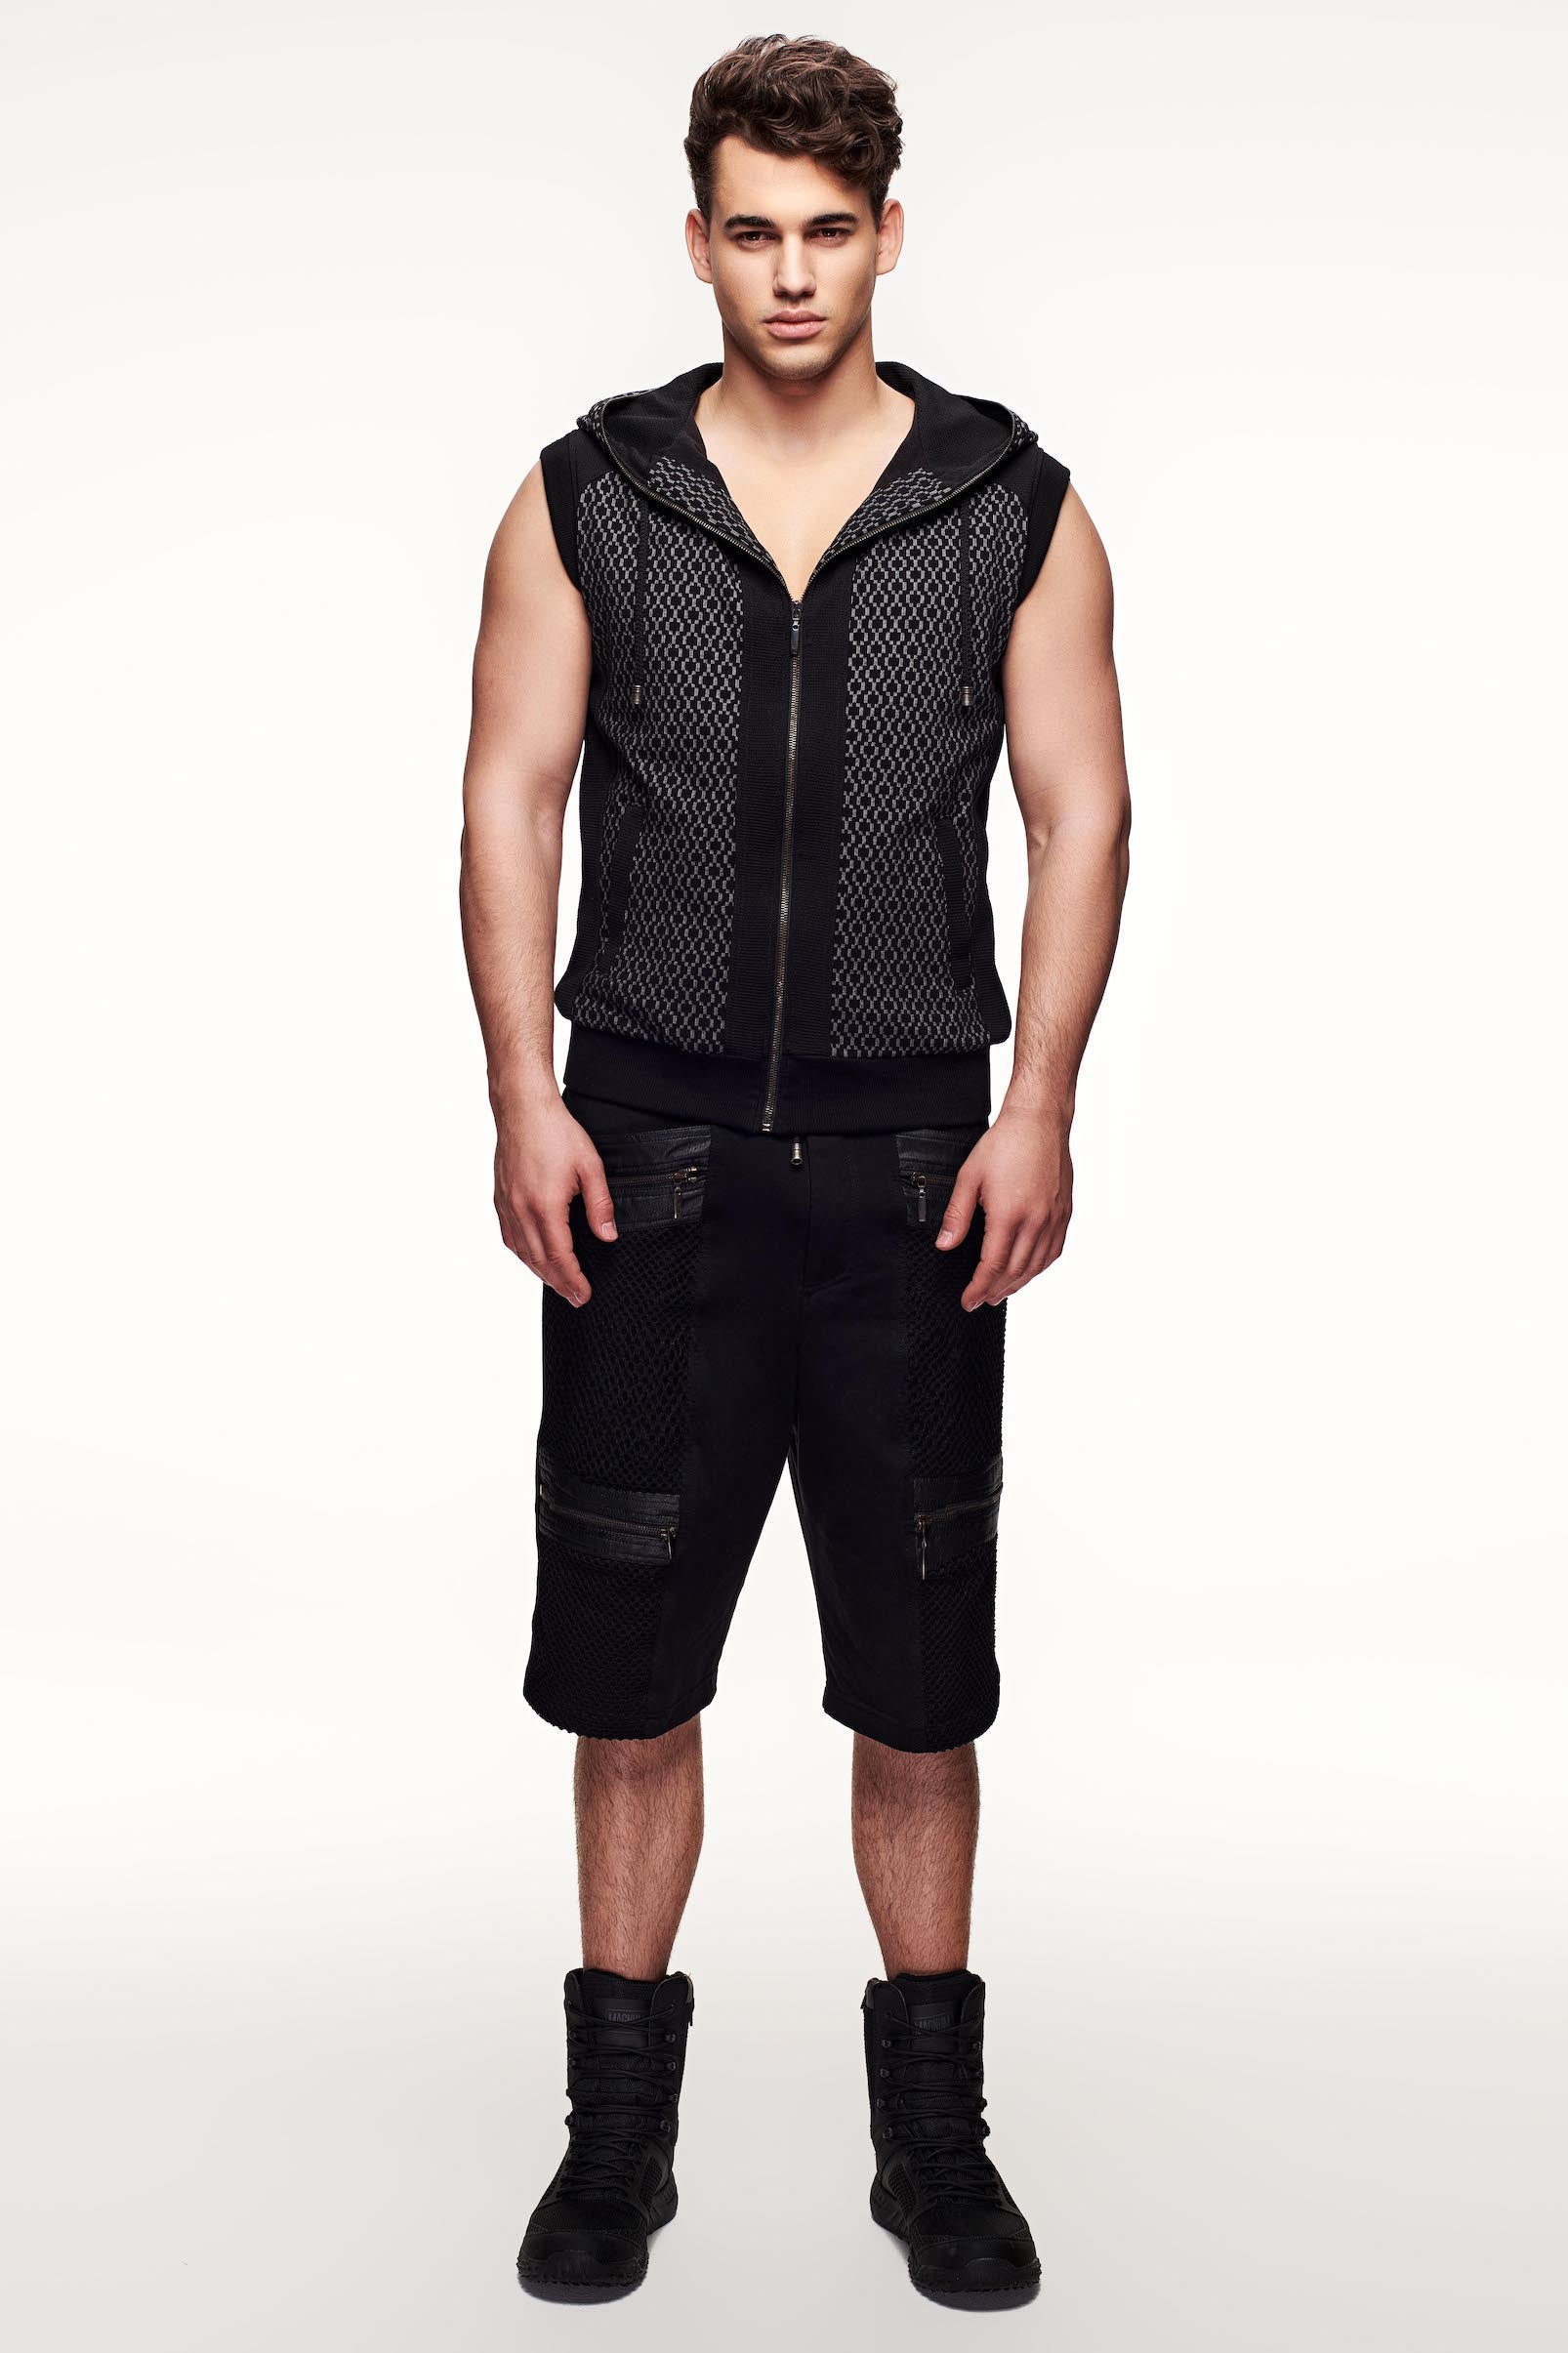 Frequency Vest